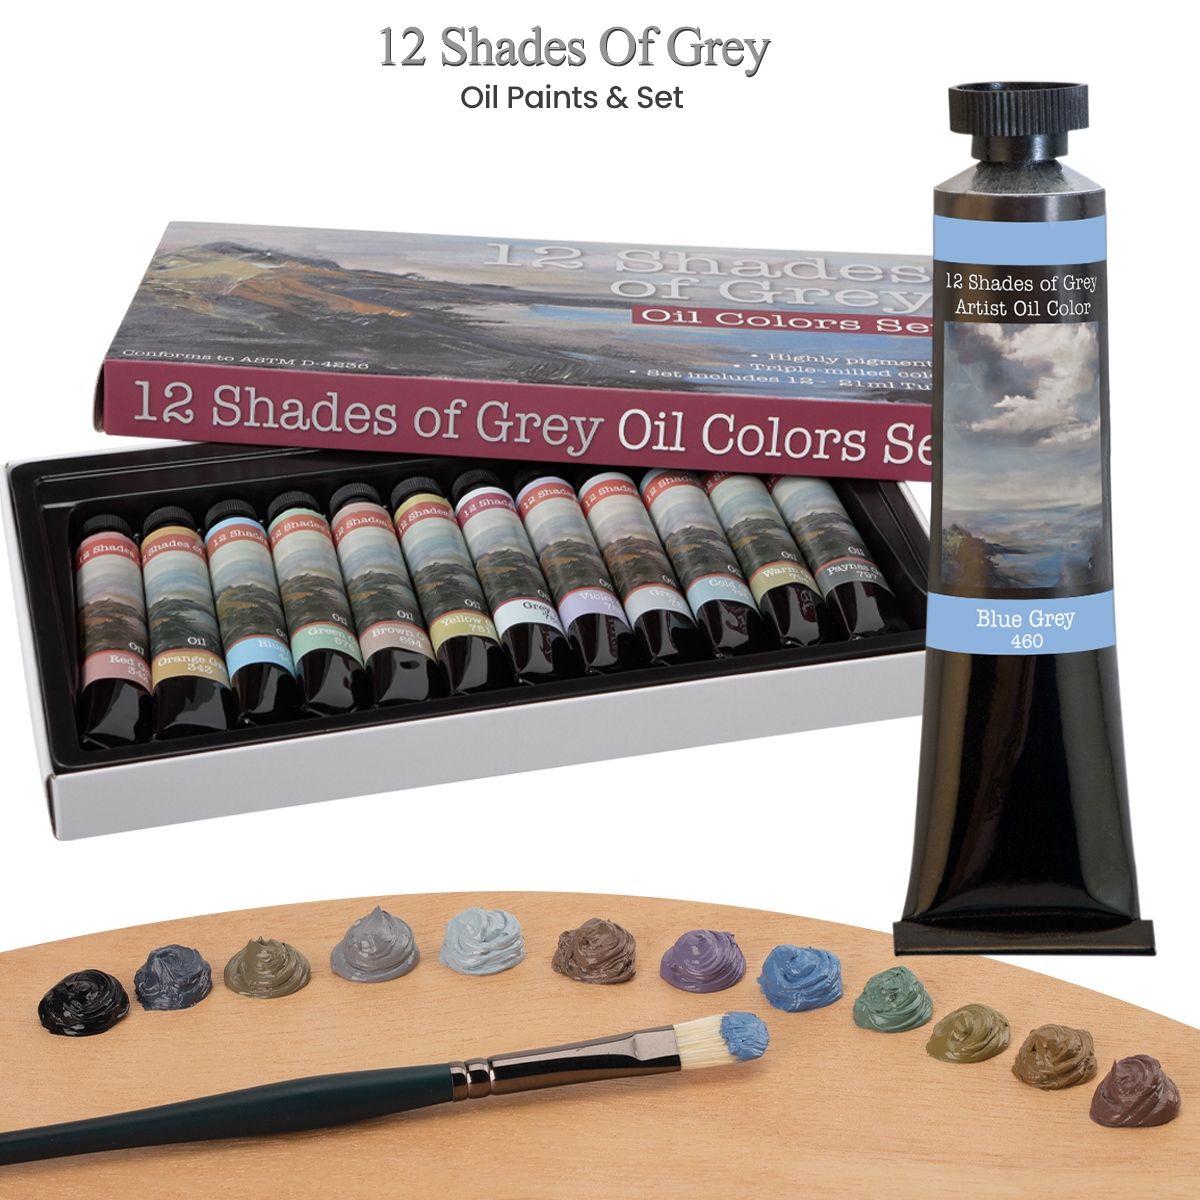 12 Shades of Grey Oil Paints